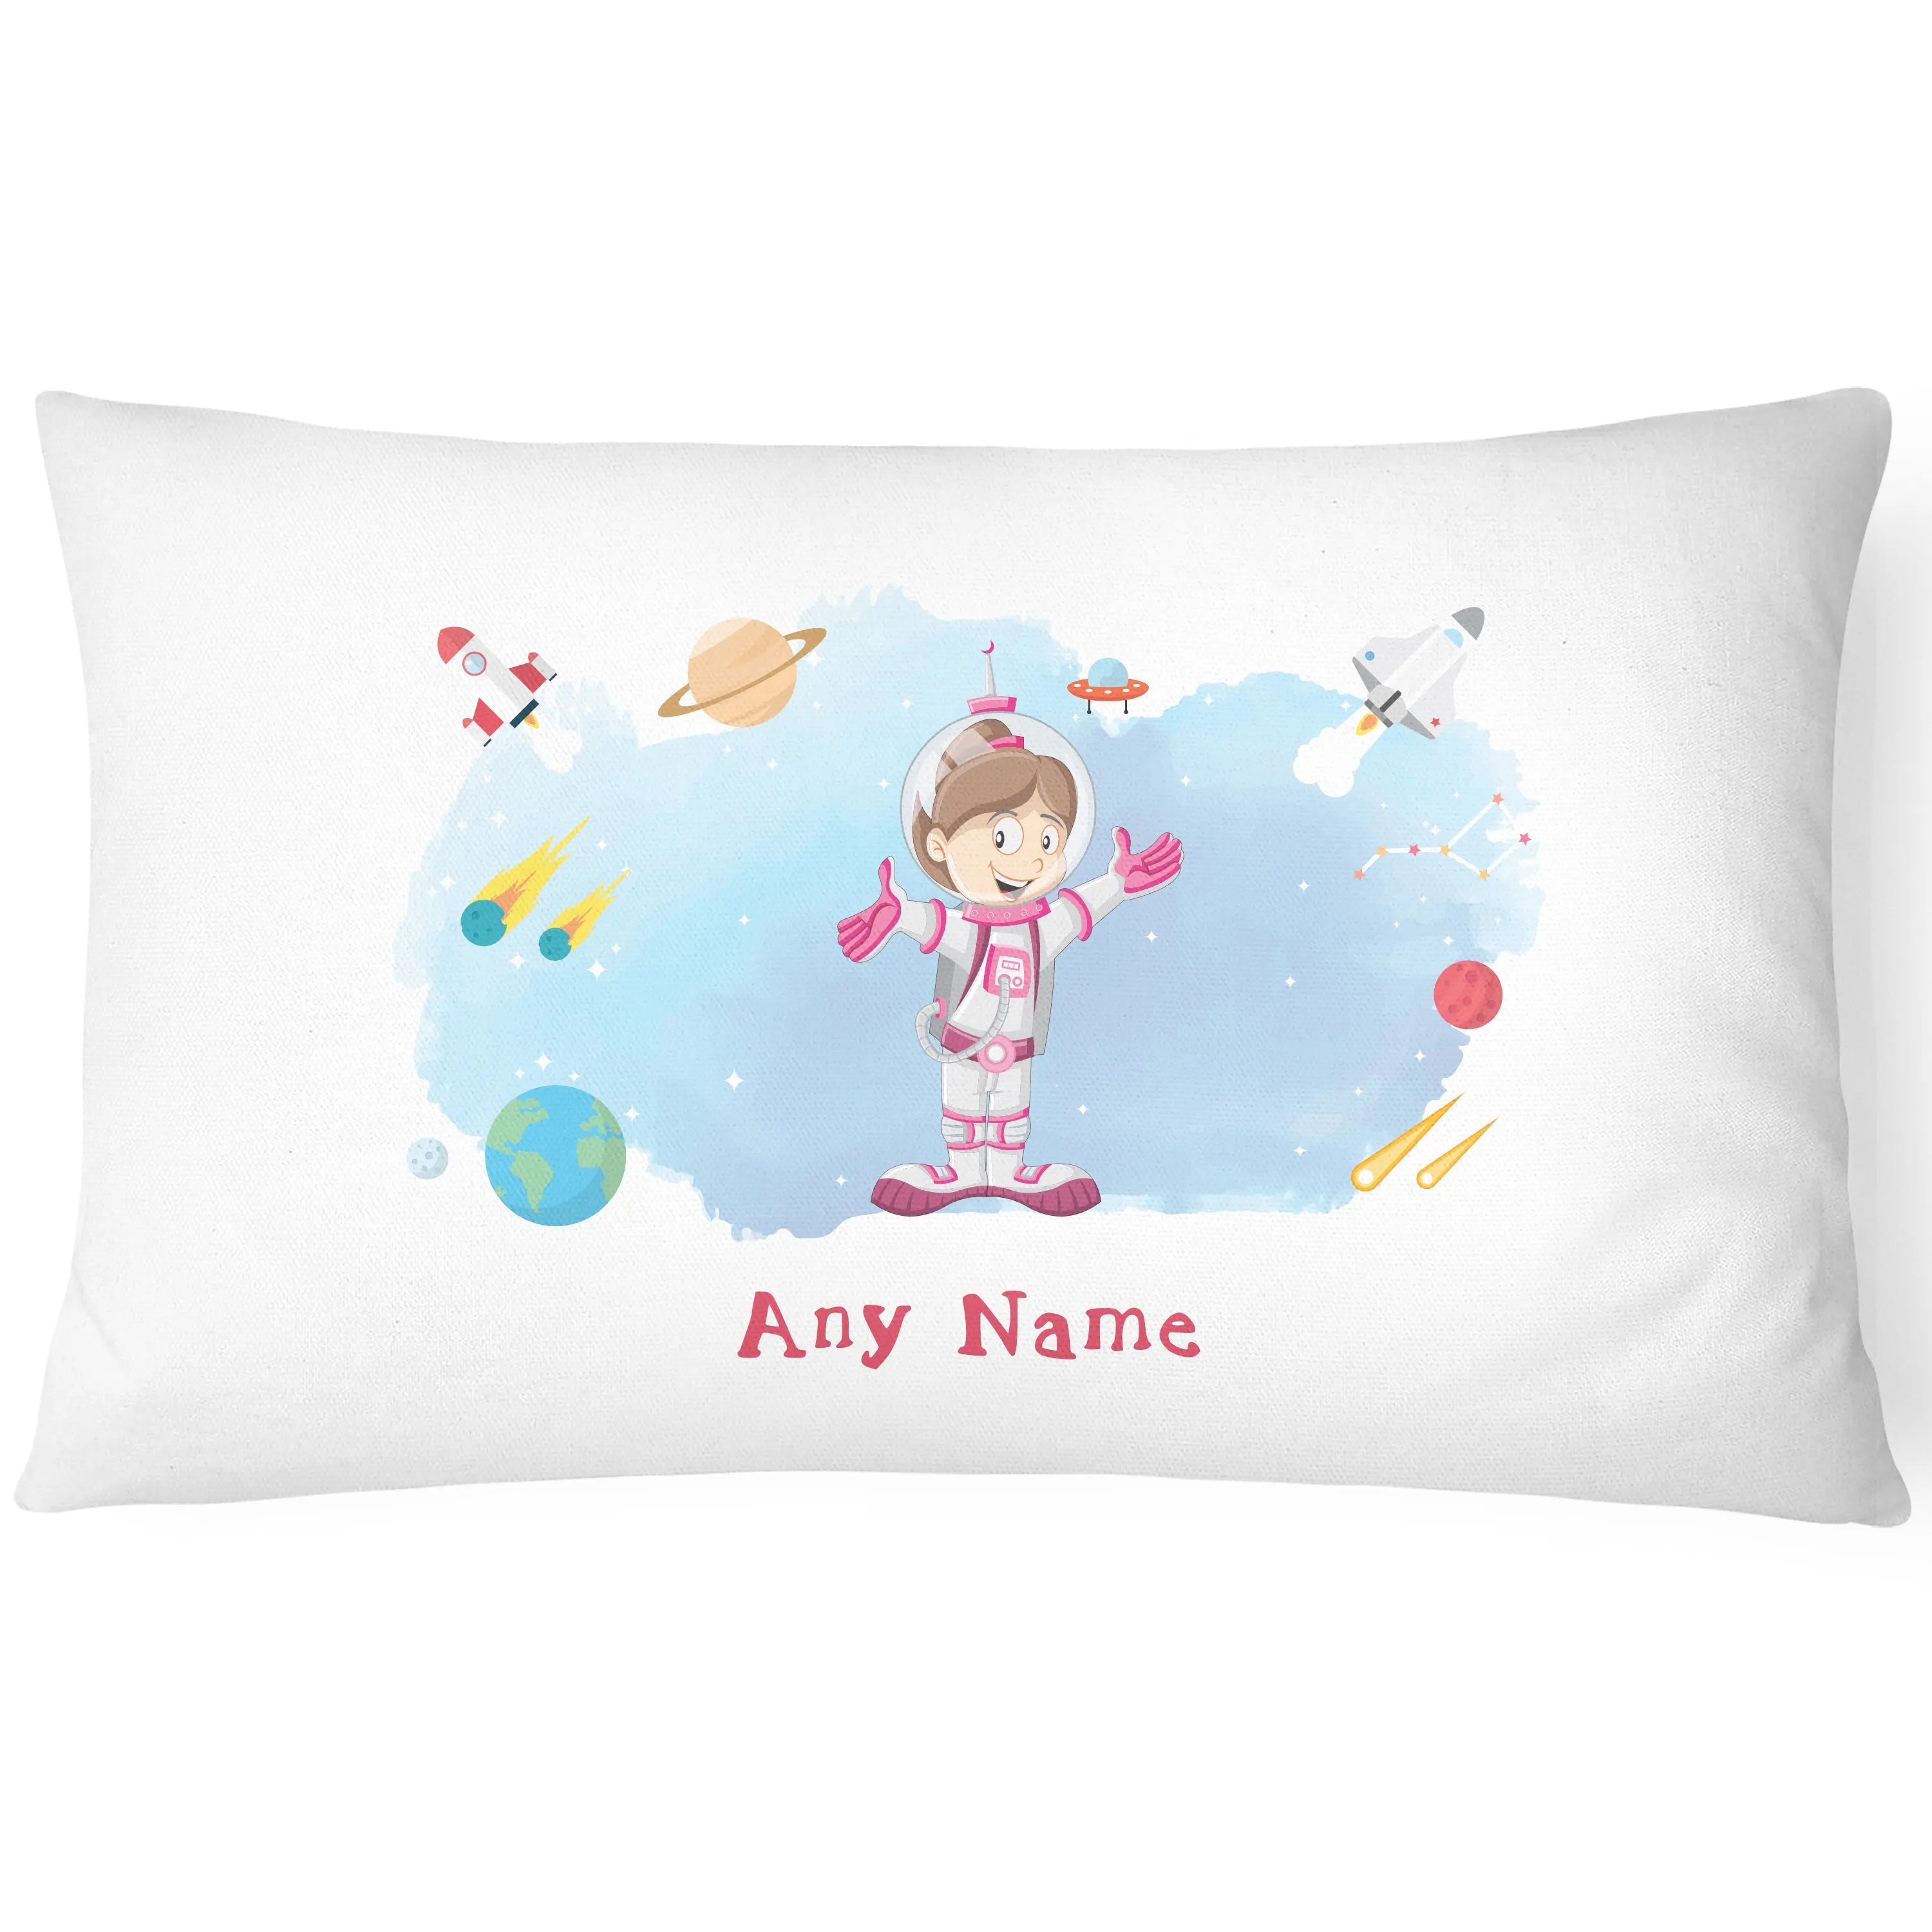 Space Pillowcase for Kids - Personalise With Any Name - It's Here! - CushionPop